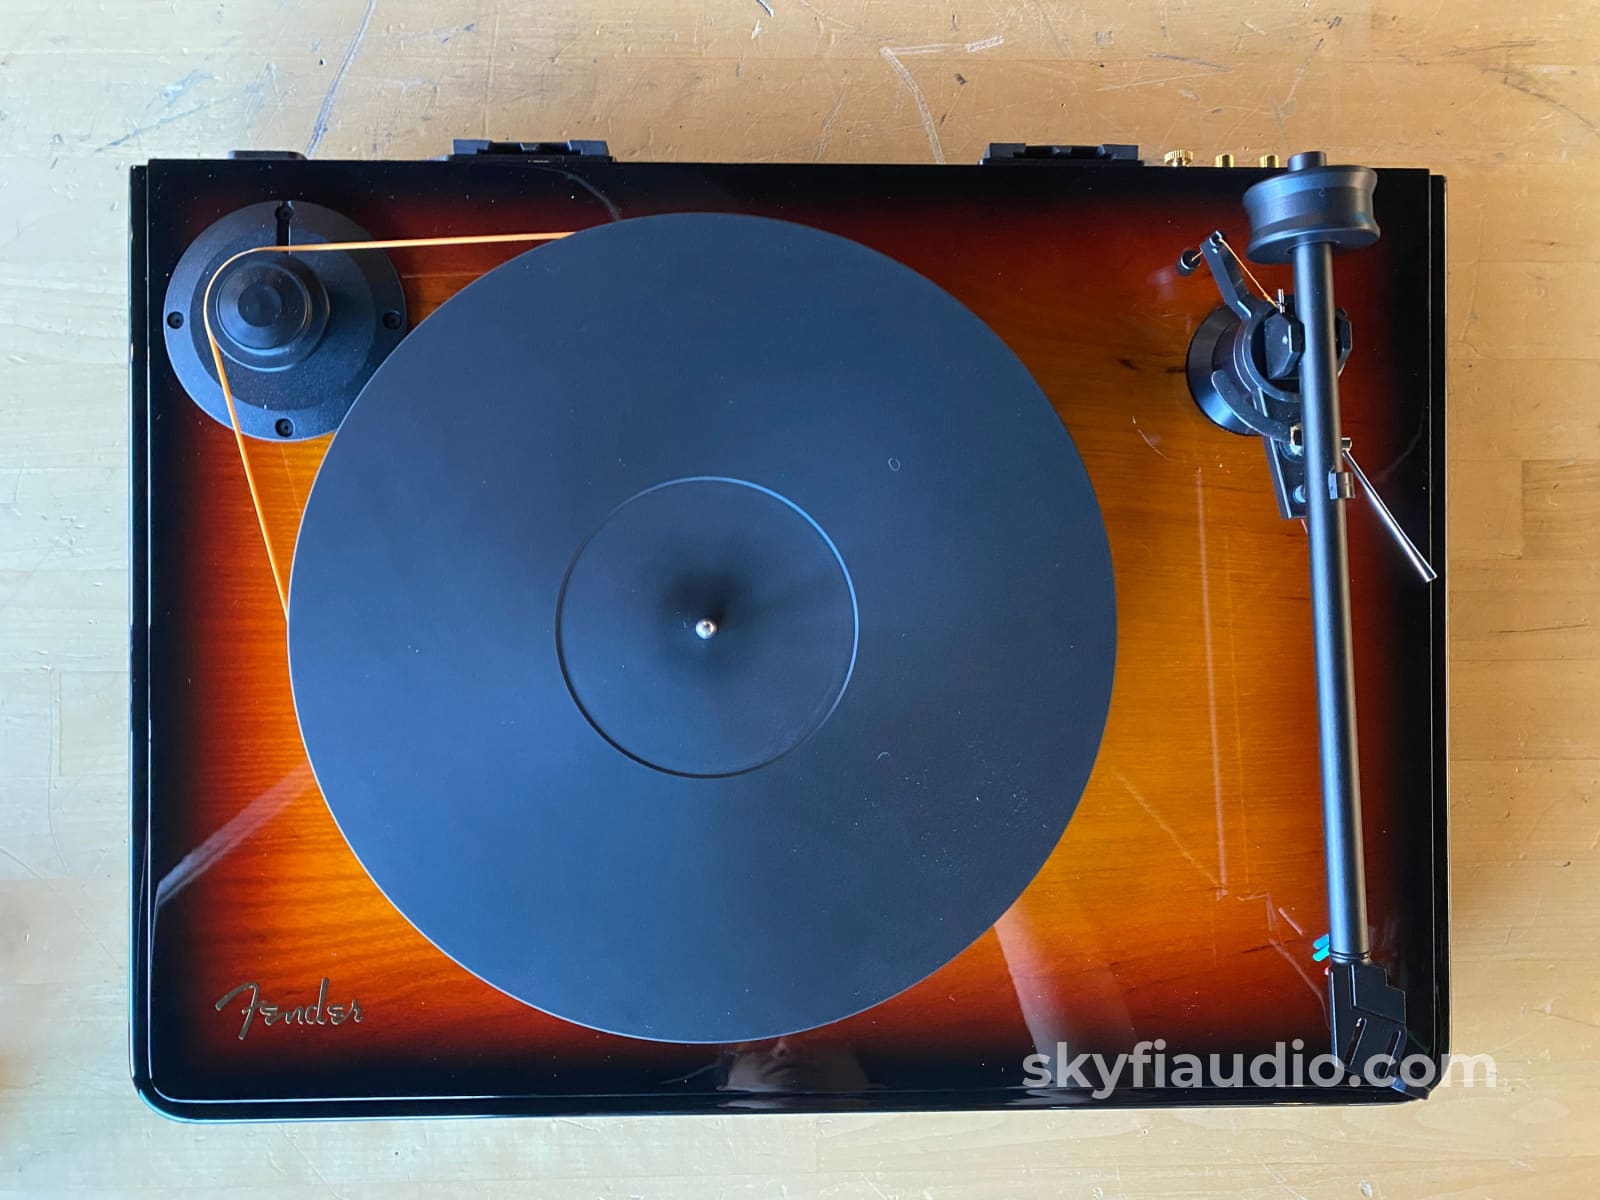 Mofi Electronics X Fender Precisiondeck Turntable With New Sumiko Cartridge